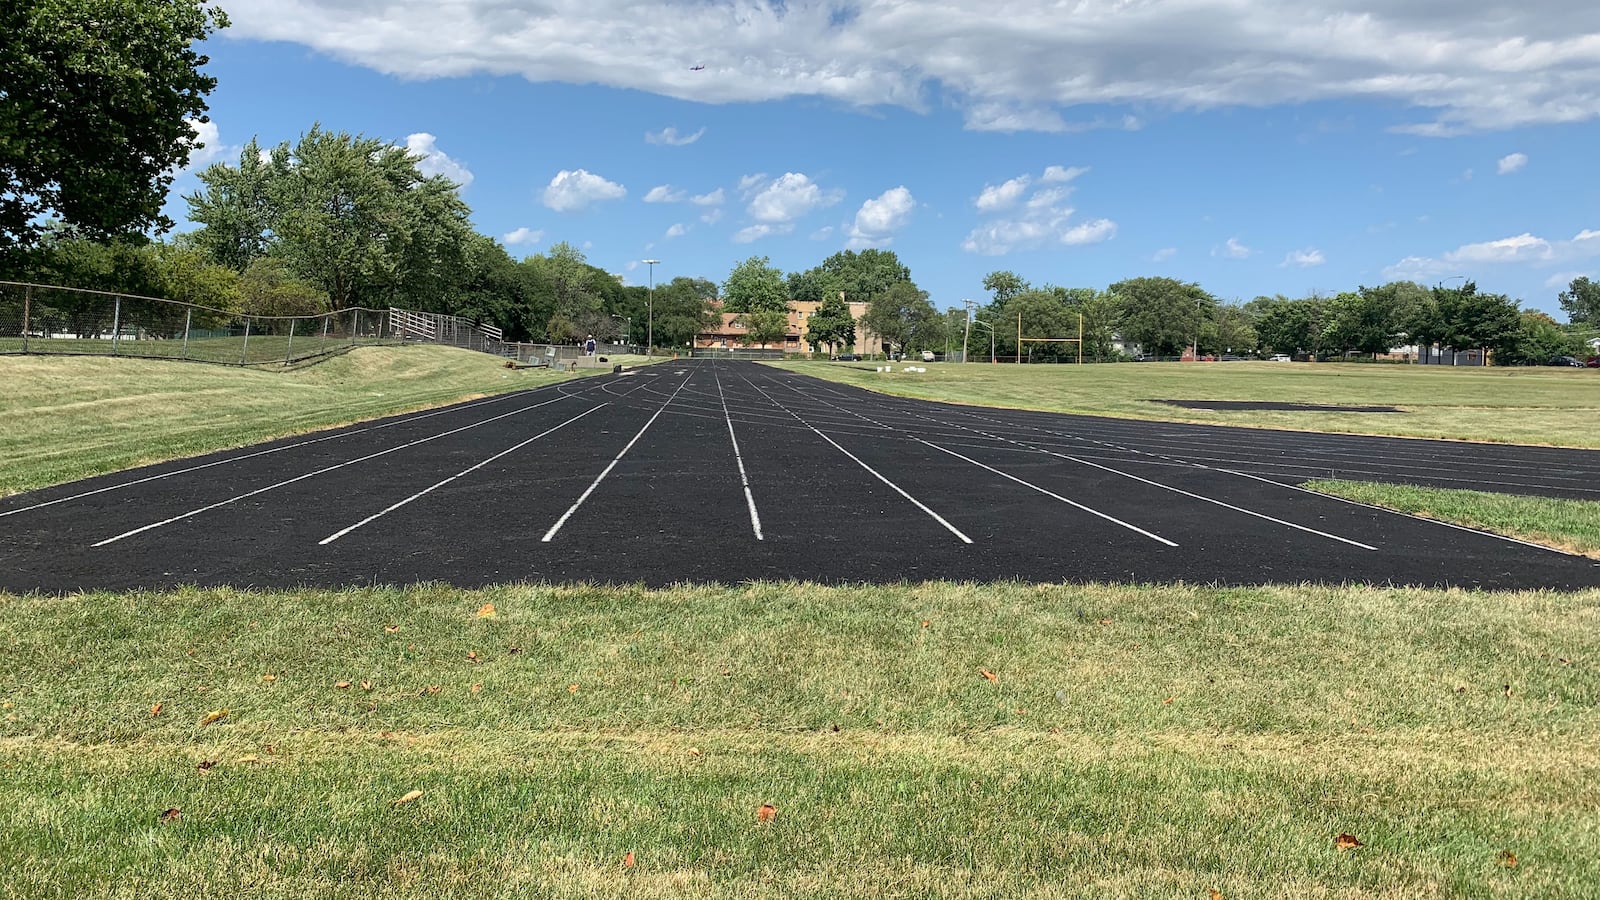 Morgan Park High School in Chicago will get new athletic fields through a new capital plan that goes before the school board on Aug. 28, 2019.